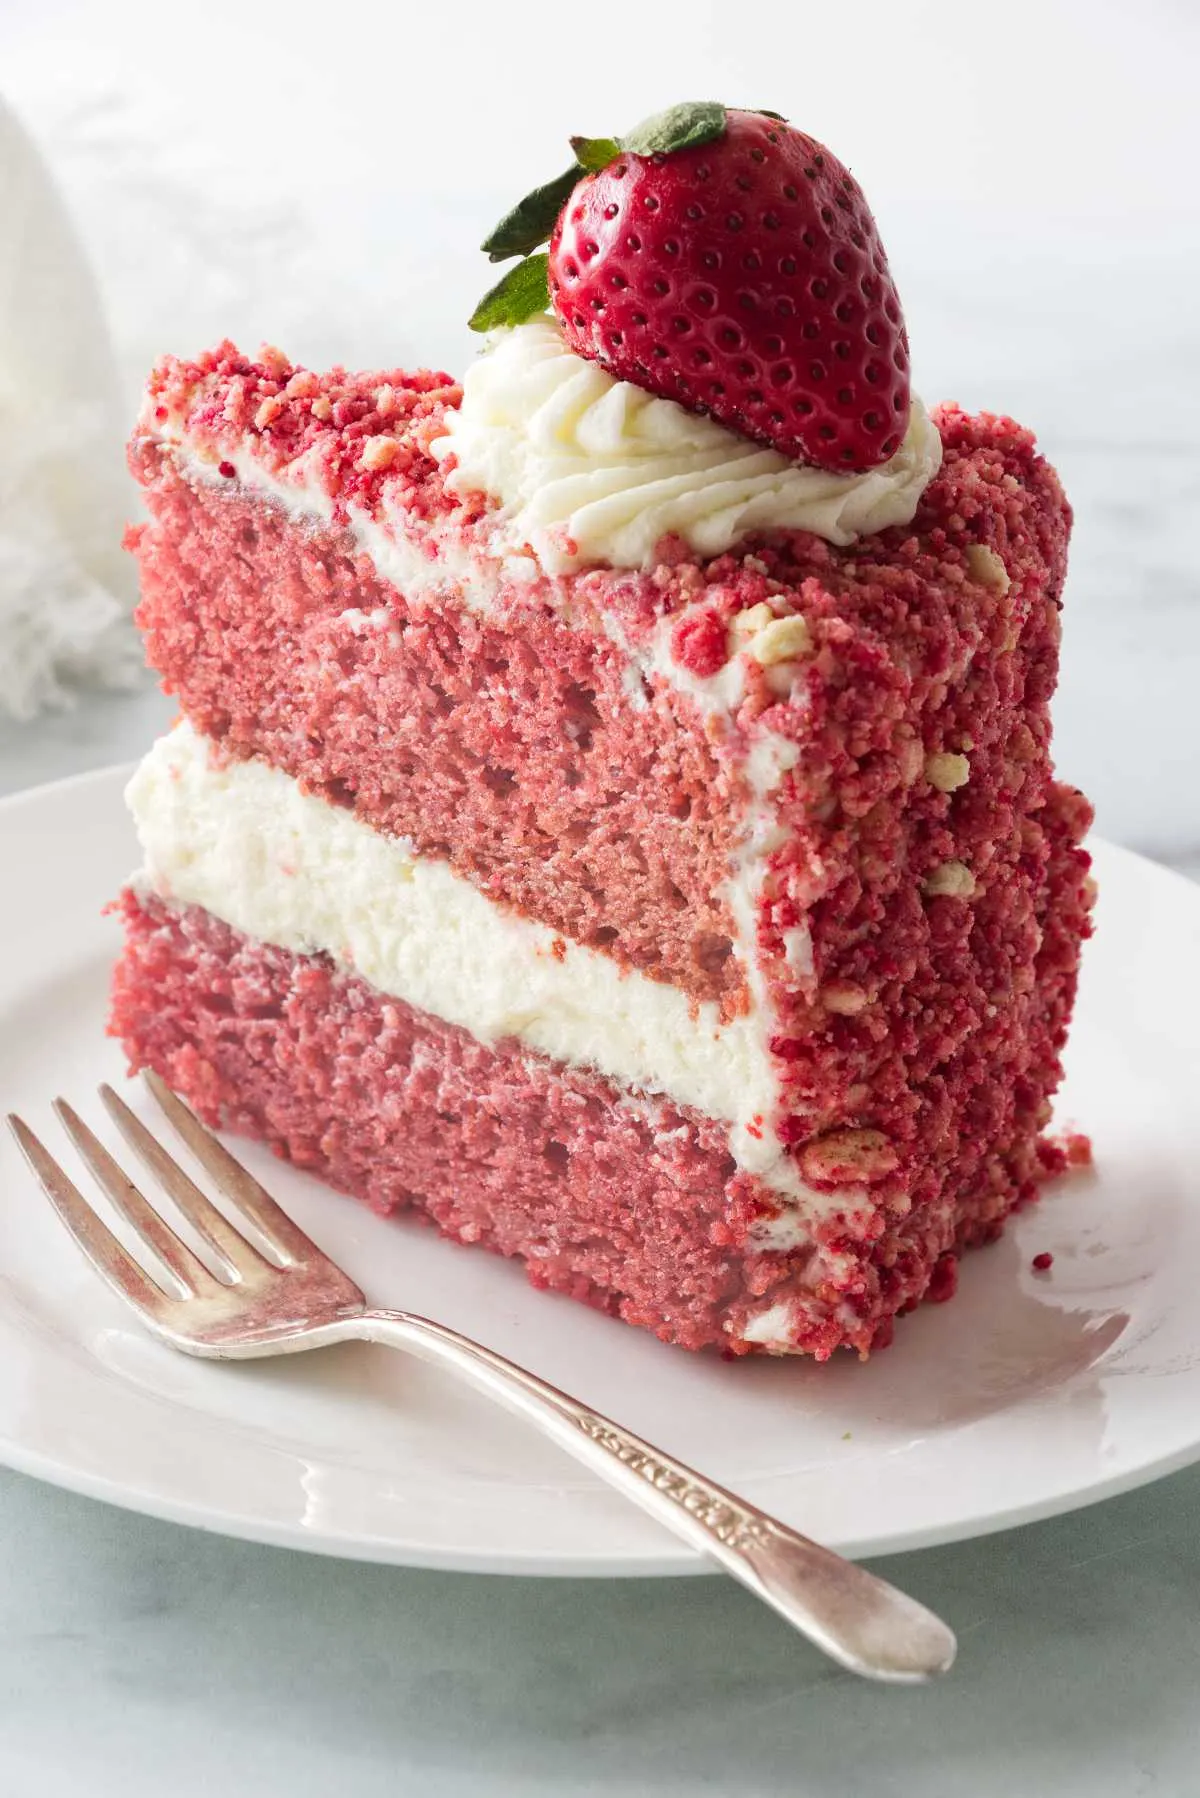 A slice of a strawberry cake coated with strawberry crunch crumble.